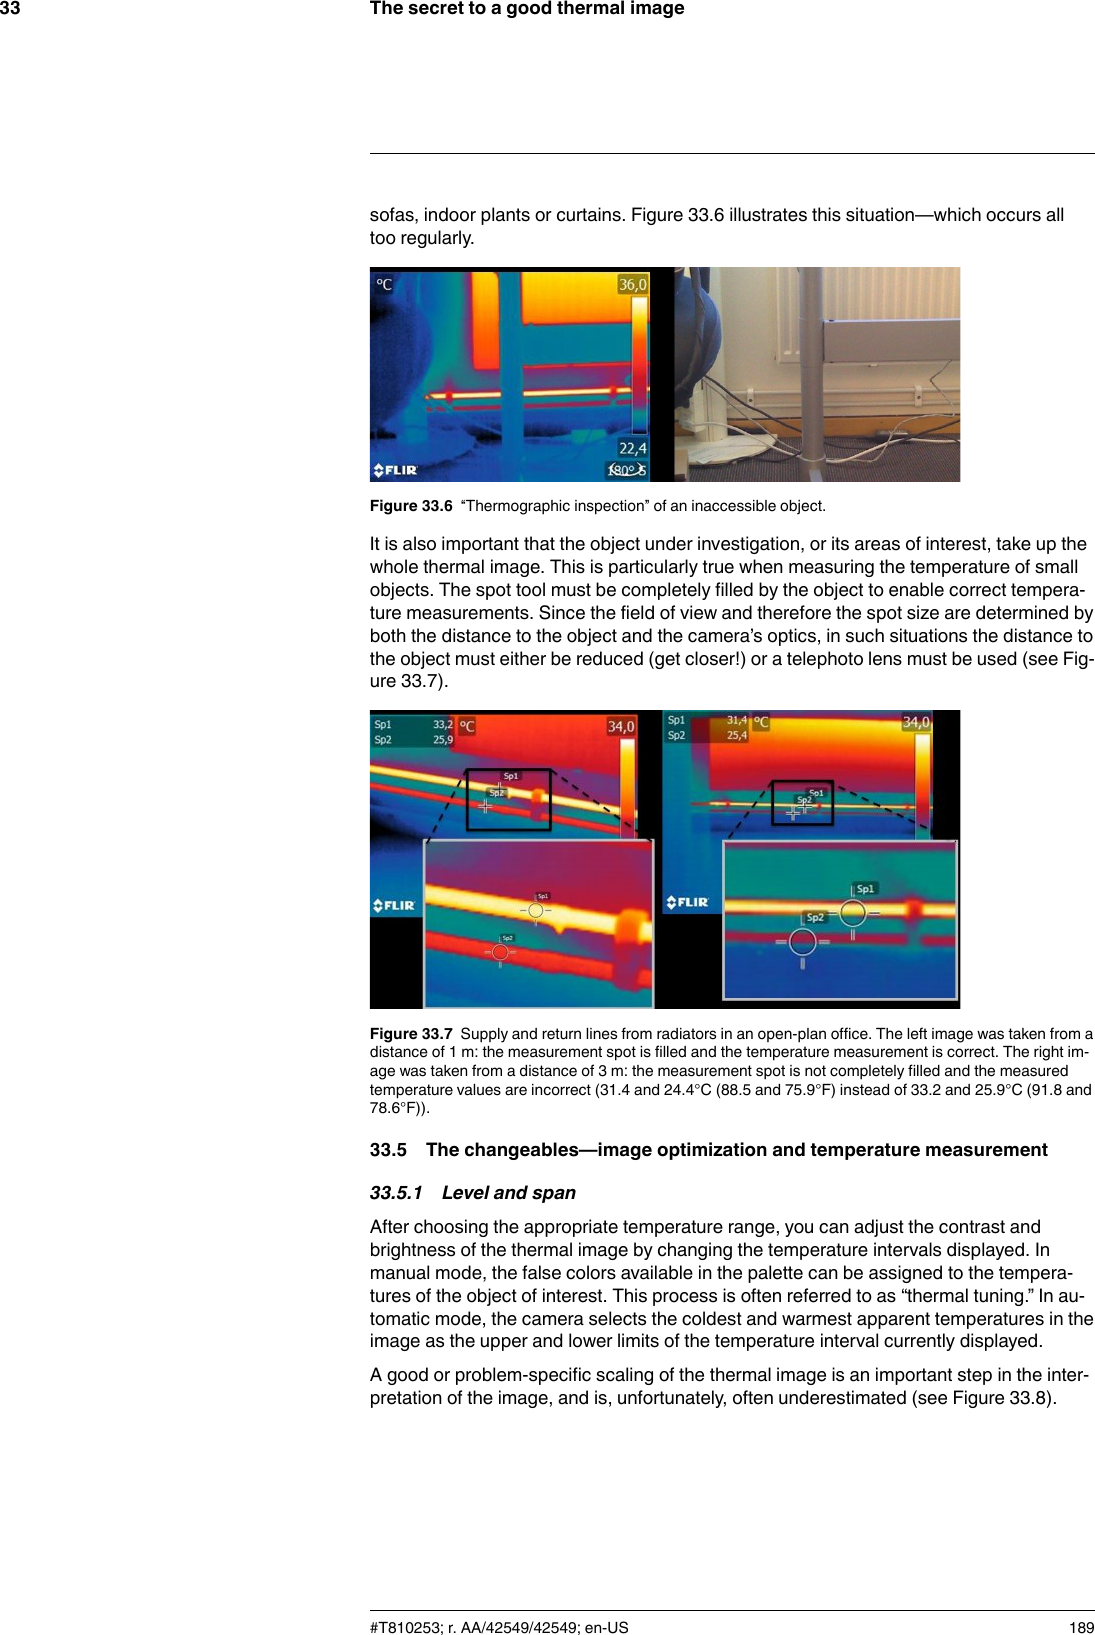 The secret to a good thermal image33sofas, indoor plants or curtains. Figure 33.6 illustrates this situation—which occurs alltoo regularly.Figure 33.6 “Thermographic inspection” of an inaccessible object.It is also important that the object under investigation, or its areas of interest, take up thewhole thermal image. This is particularly true when measuring the temperature of smallobjects. The spot tool must be completely filled by the object to enable correct tempera-ture measurements. Since the field of view and therefore the spot size are determined byboth the distance to the object and the camera’s optics, in such situations the distance tothe object must either be reduced (get closer!) or a telephoto lens must be used (see Fig-ure 33.7).Figure 33.7 Supply and return lines from radiators in an open-plan office. The left image was taken from adistance of 1 m: the measurement spot is filled and the temperature measurement is correct. The right im-age was taken from a distance of 3 m: the measurement spot is not completely filled and the measuredtemperature values are incorrect (31.4 and 24.4°C (88.5 and 75.9°F) instead of 33.2 and 25.9°C (91.8 and78.6°F)).33.5 The changeables—image optimization and temperature measurement33.5.1 Level and spanAfter choosing the appropriate temperature range, you can adjust the contrast andbrightness of the thermal image by changing the temperature intervals displayed. Inmanual mode, the false colors available in the palette can be assigned to the tempera-tures of the object of interest. This process is often referred to as “thermal tuning.” In au-tomatic mode, the camera selects the coldest and warmest apparent temperatures in theimage as the upper and lower limits of the temperature interval currently displayed.A good or problem-specific scaling of the thermal image is an important step in the inter-pretation of the image, and is, unfortunately, often underestimated (see Figure 33.8).#T810253; r. AA/42549/42549; en-US 189